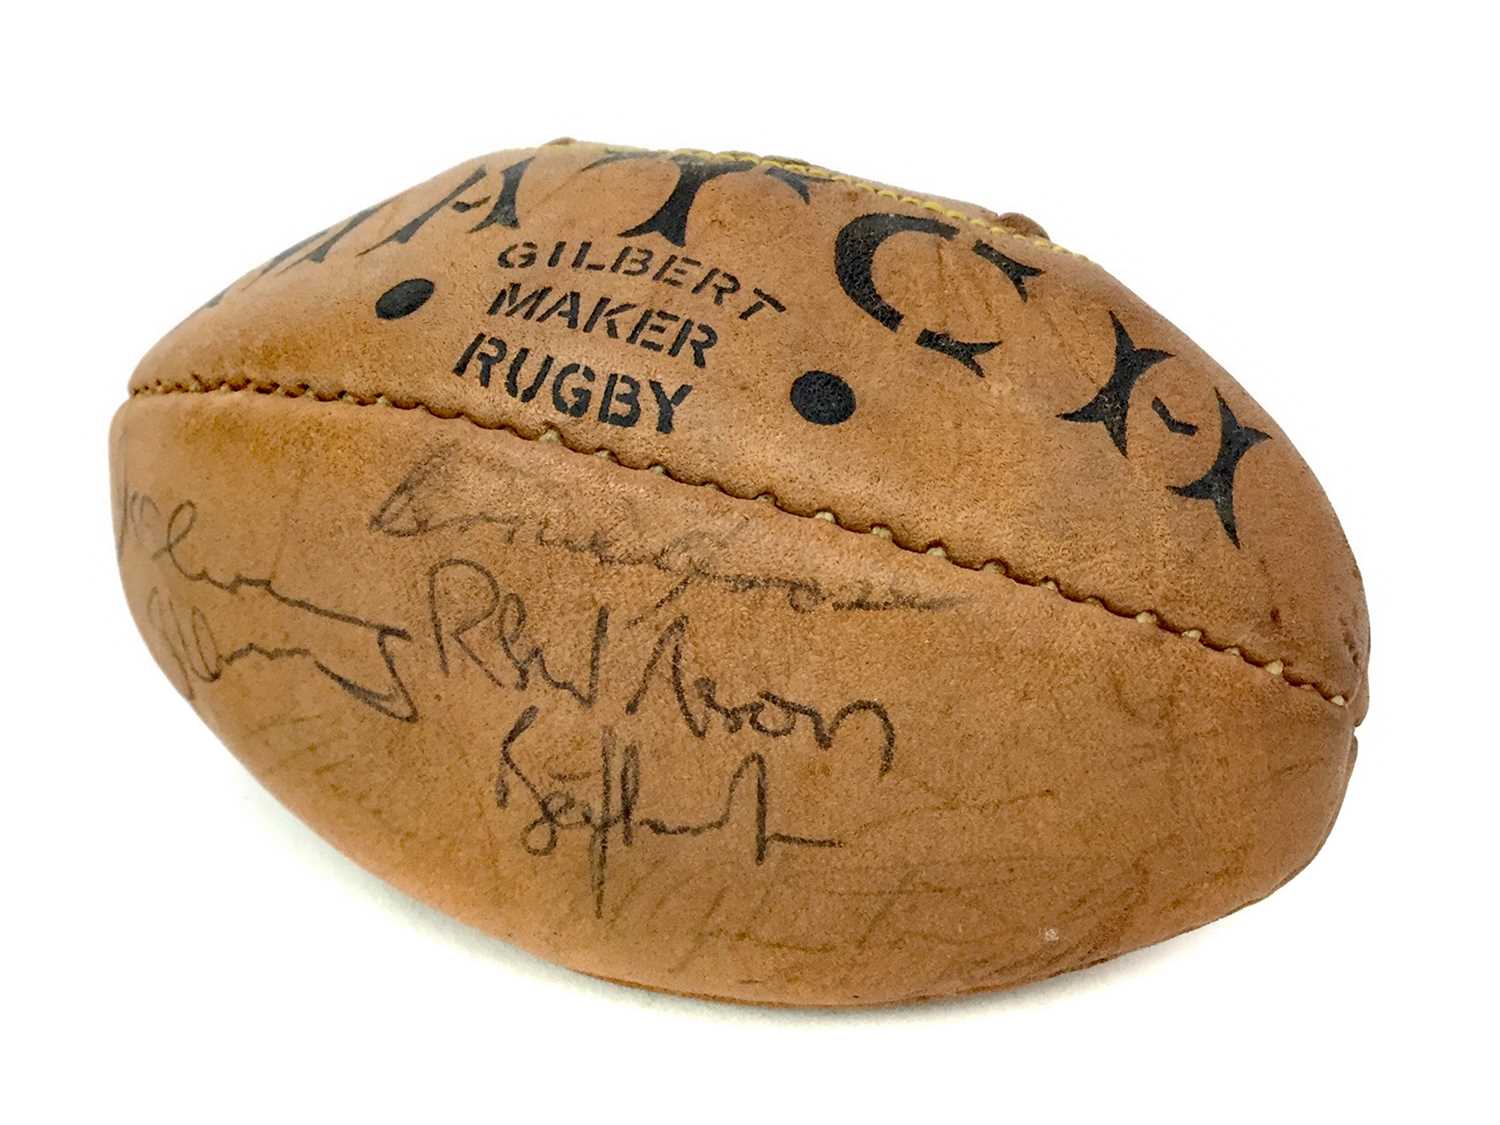 Lot 1769 - A GILBERT MINIATURE RUGBY BALL SIGNED BY MEMBERS OF 1979 ALL BLACKS TEAM